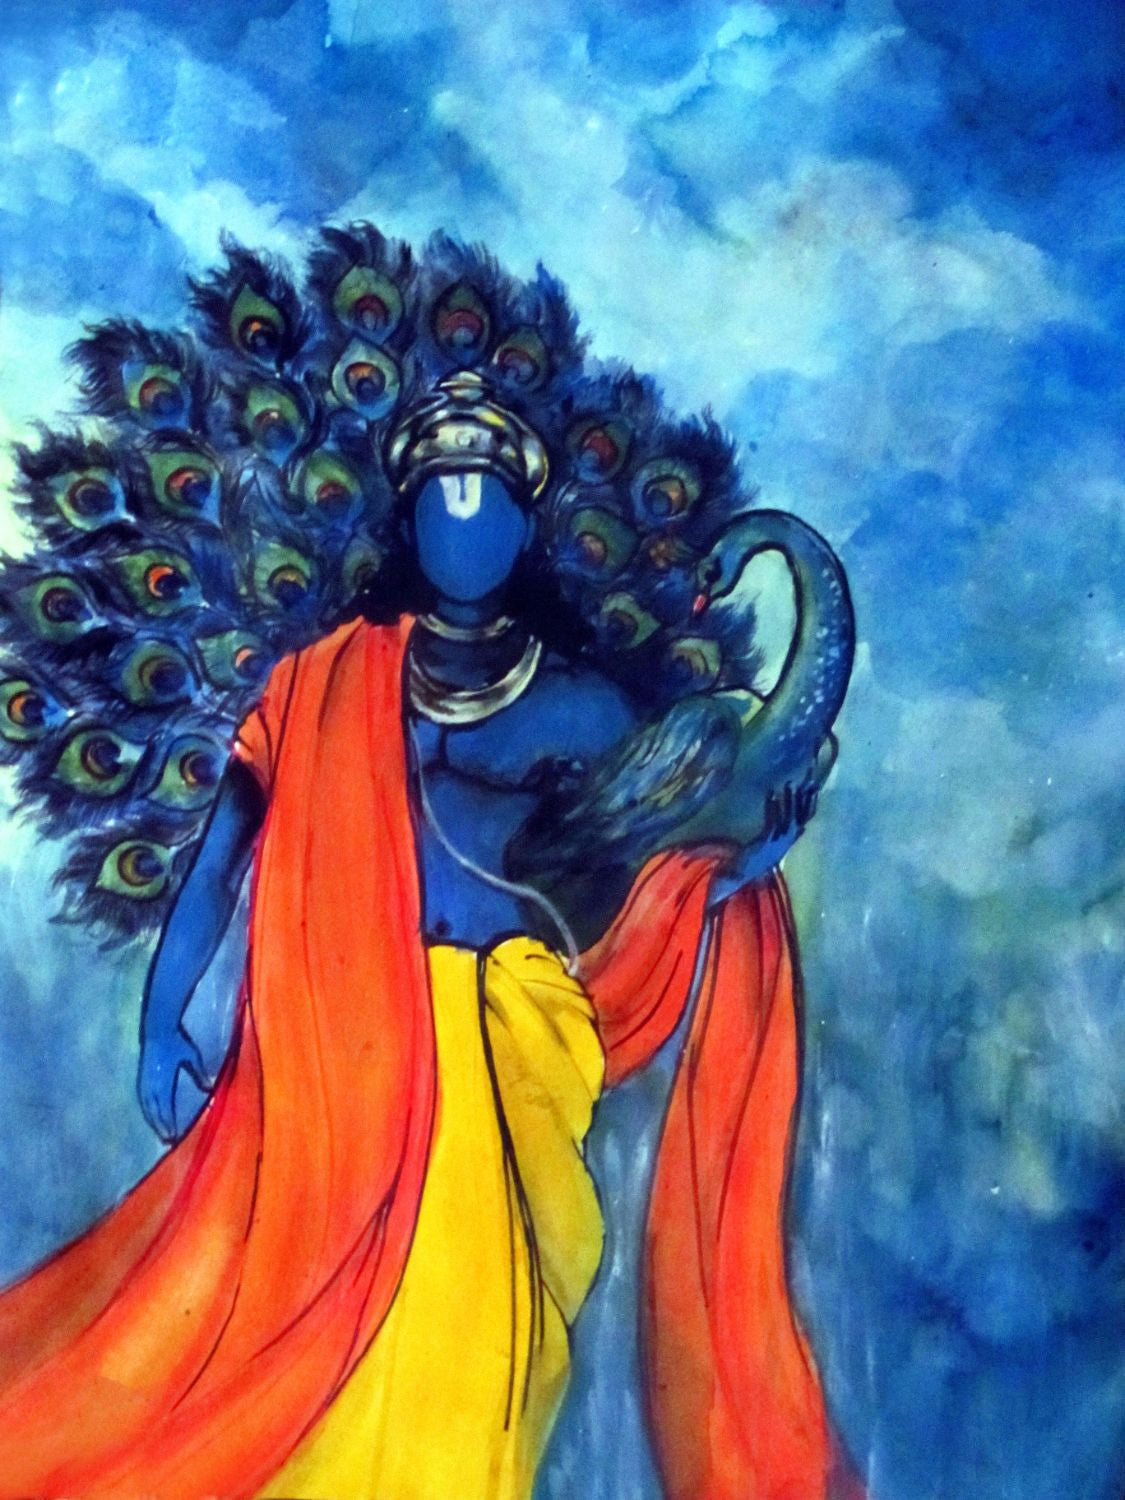 Indian Art - Acrylic Painting - Krishna with Peacock - Life Size ...